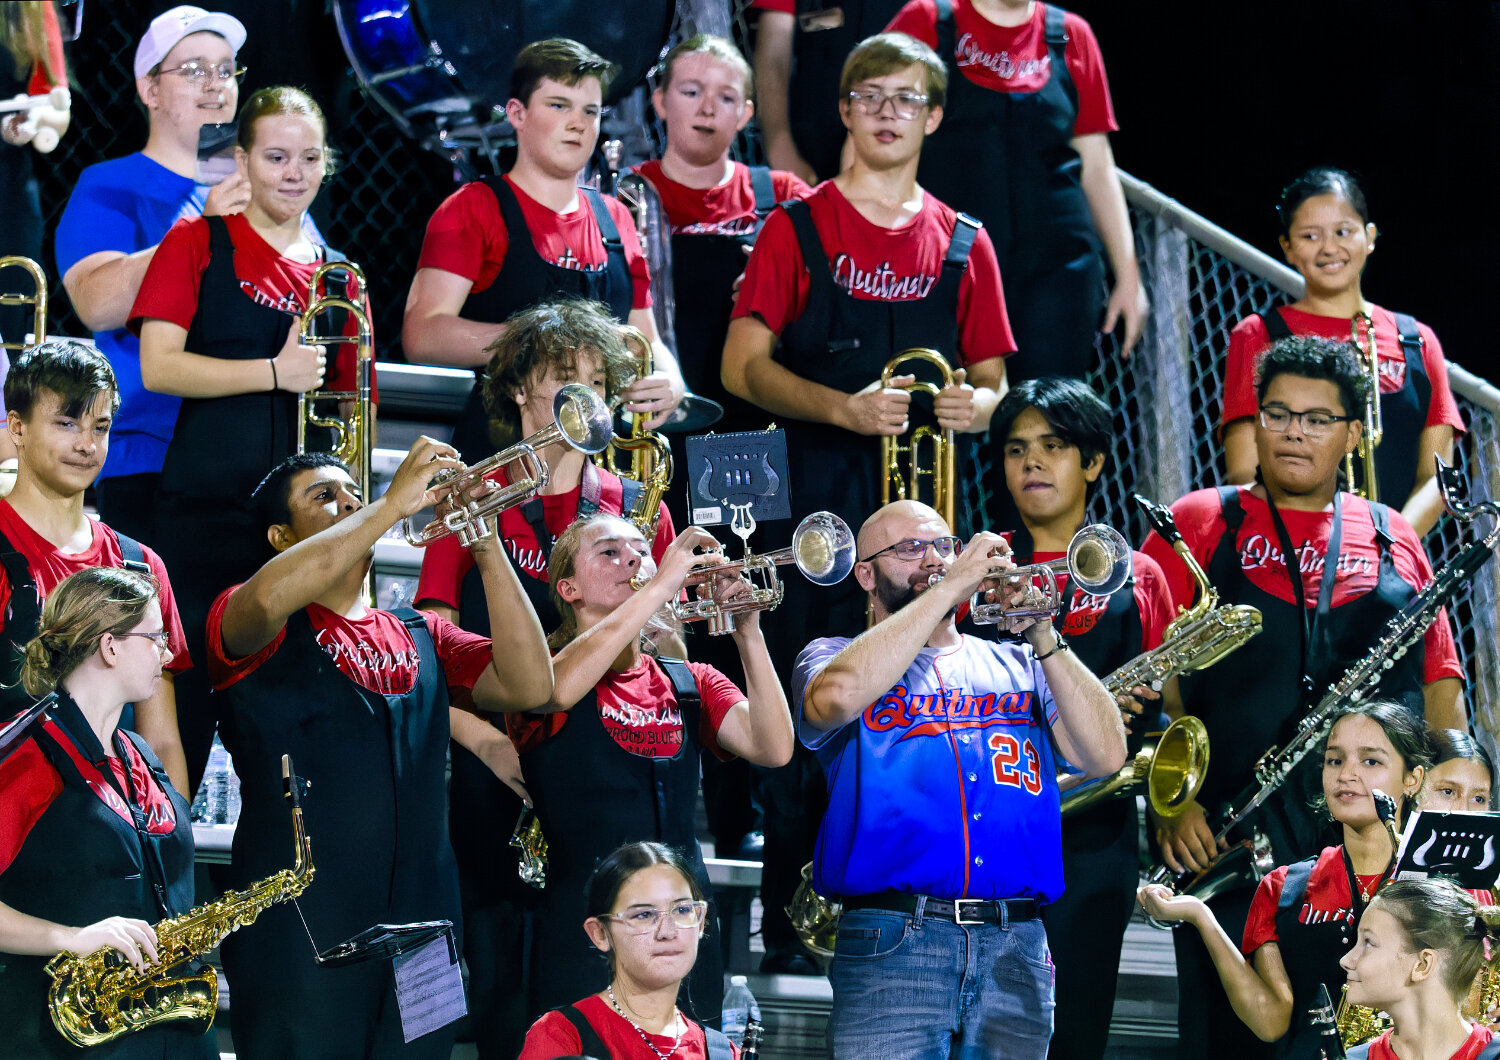 Quitman band director Michael Barron teaches the trumpet section about playing in the upper register as the other sections take notes. [few more photos here]